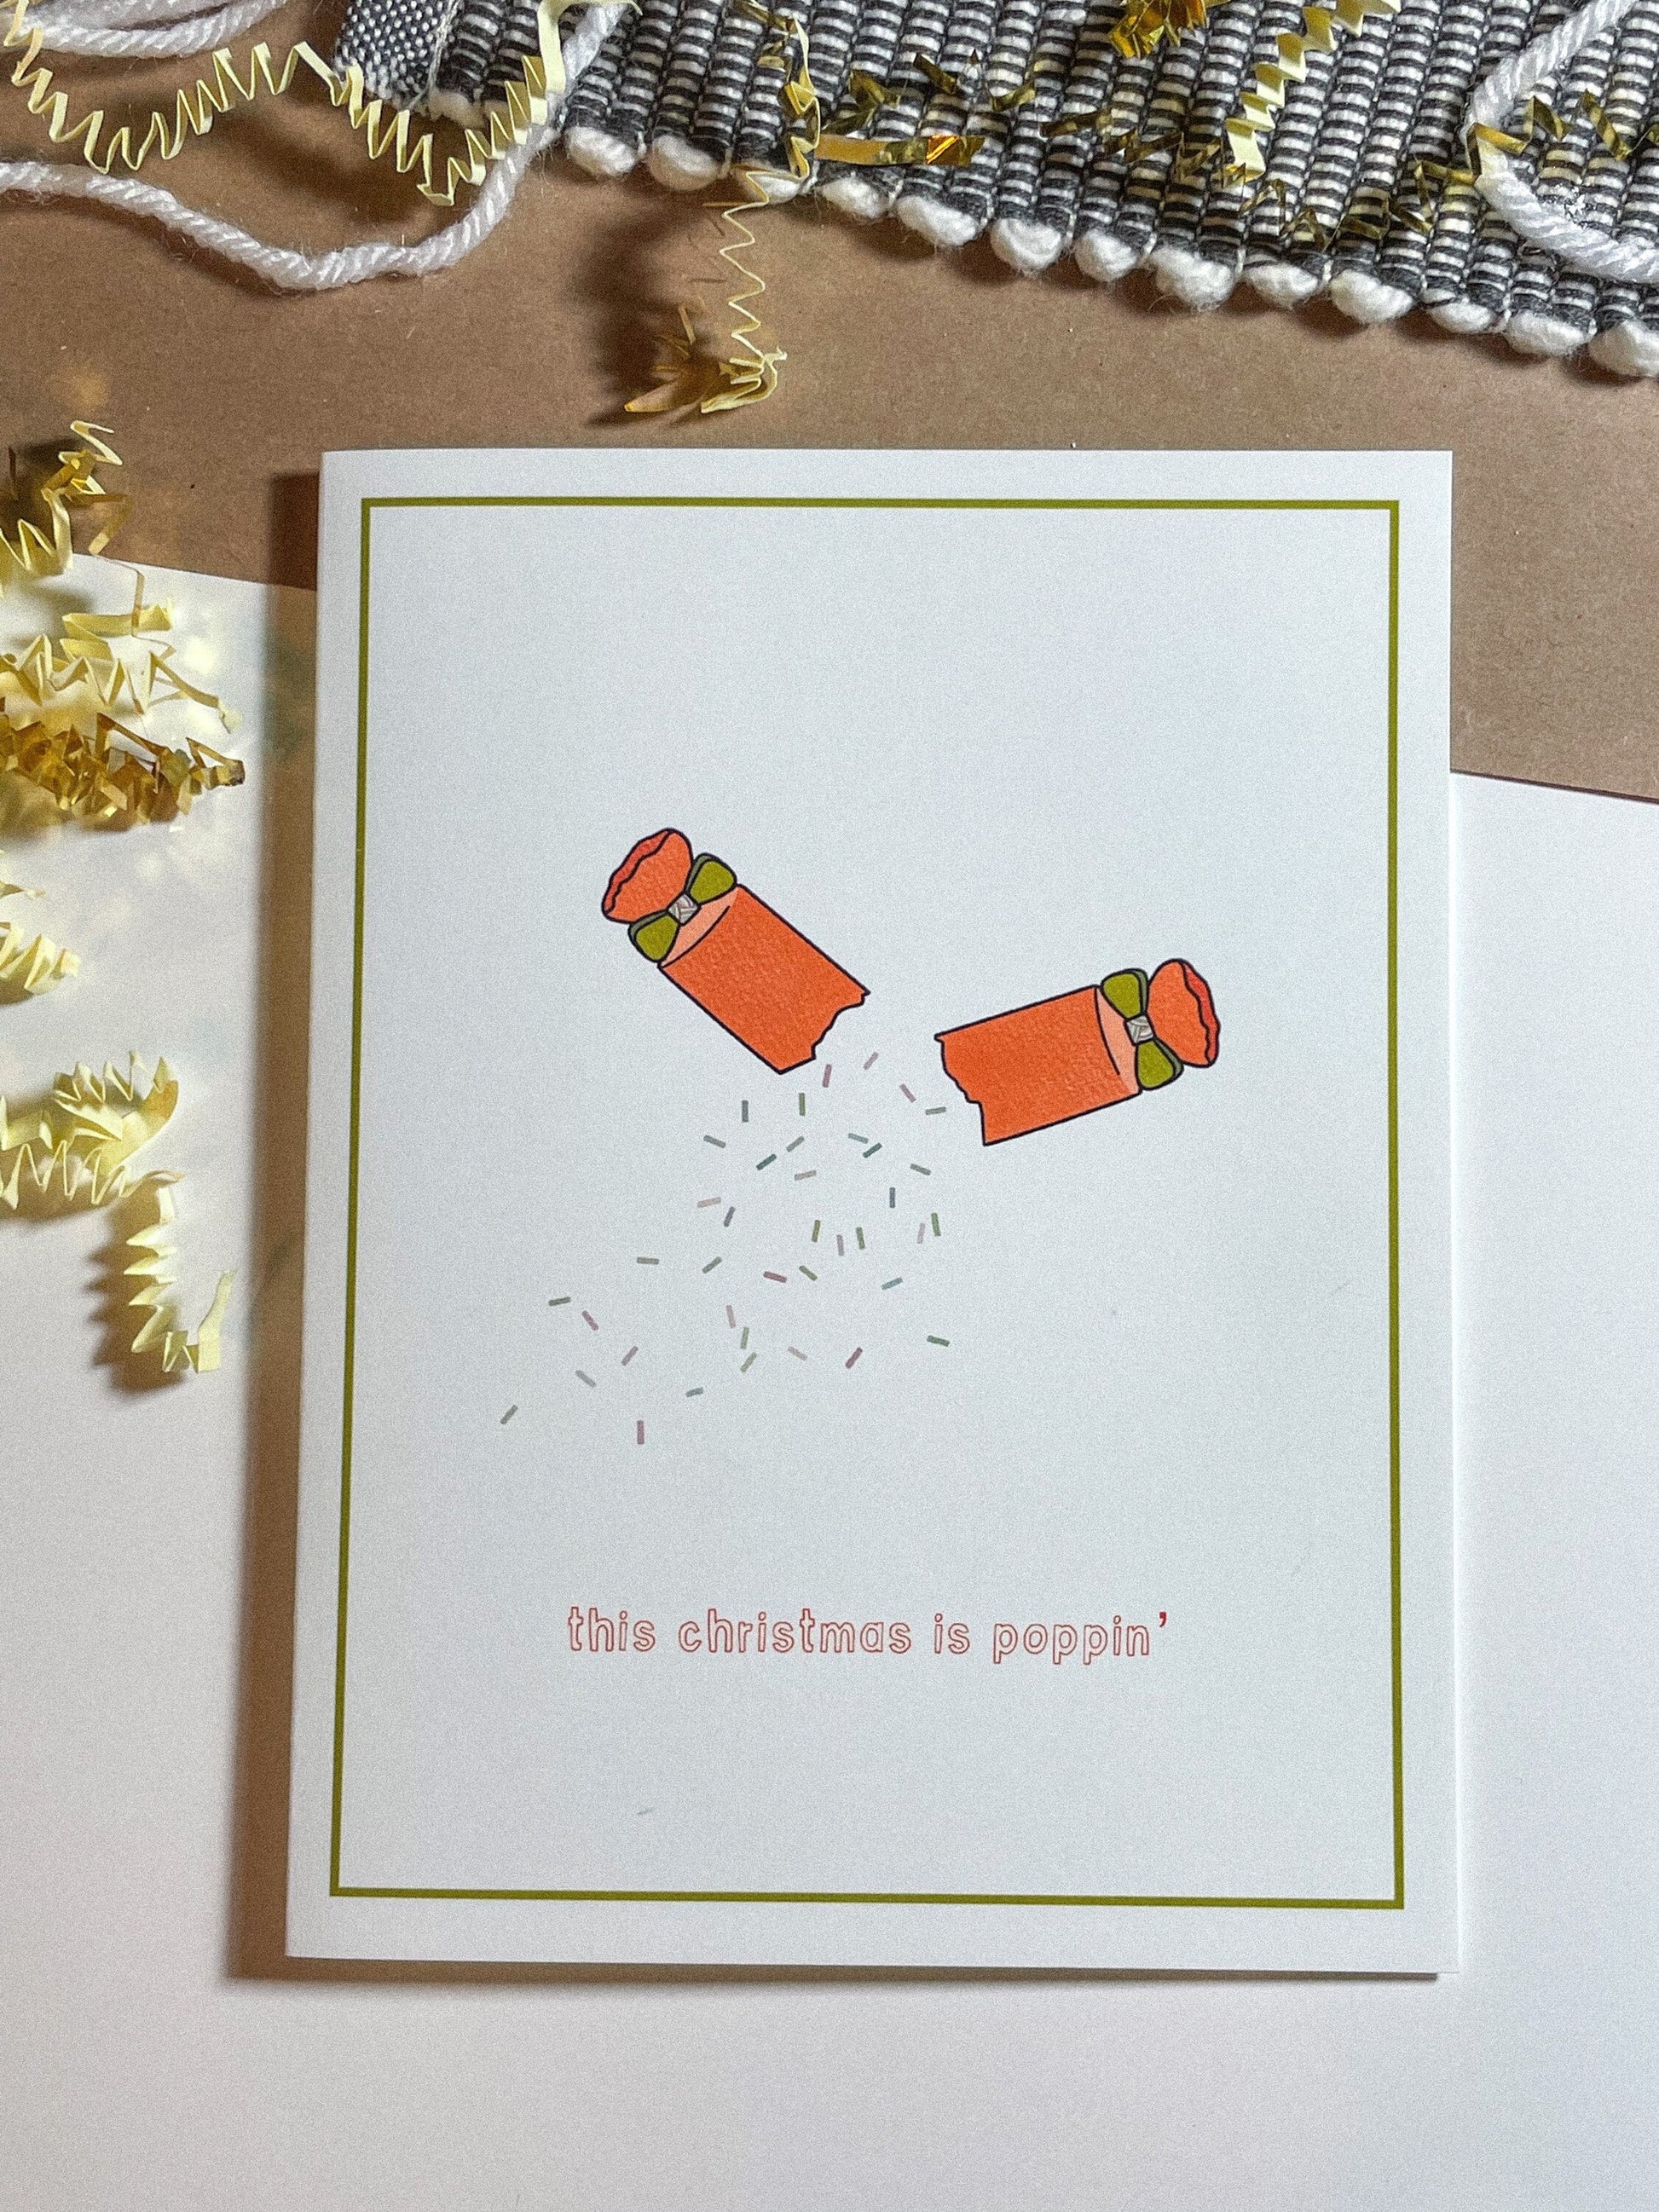 redish orange party popper mid-pop with confetti spilling out and the text this christmas is popppin